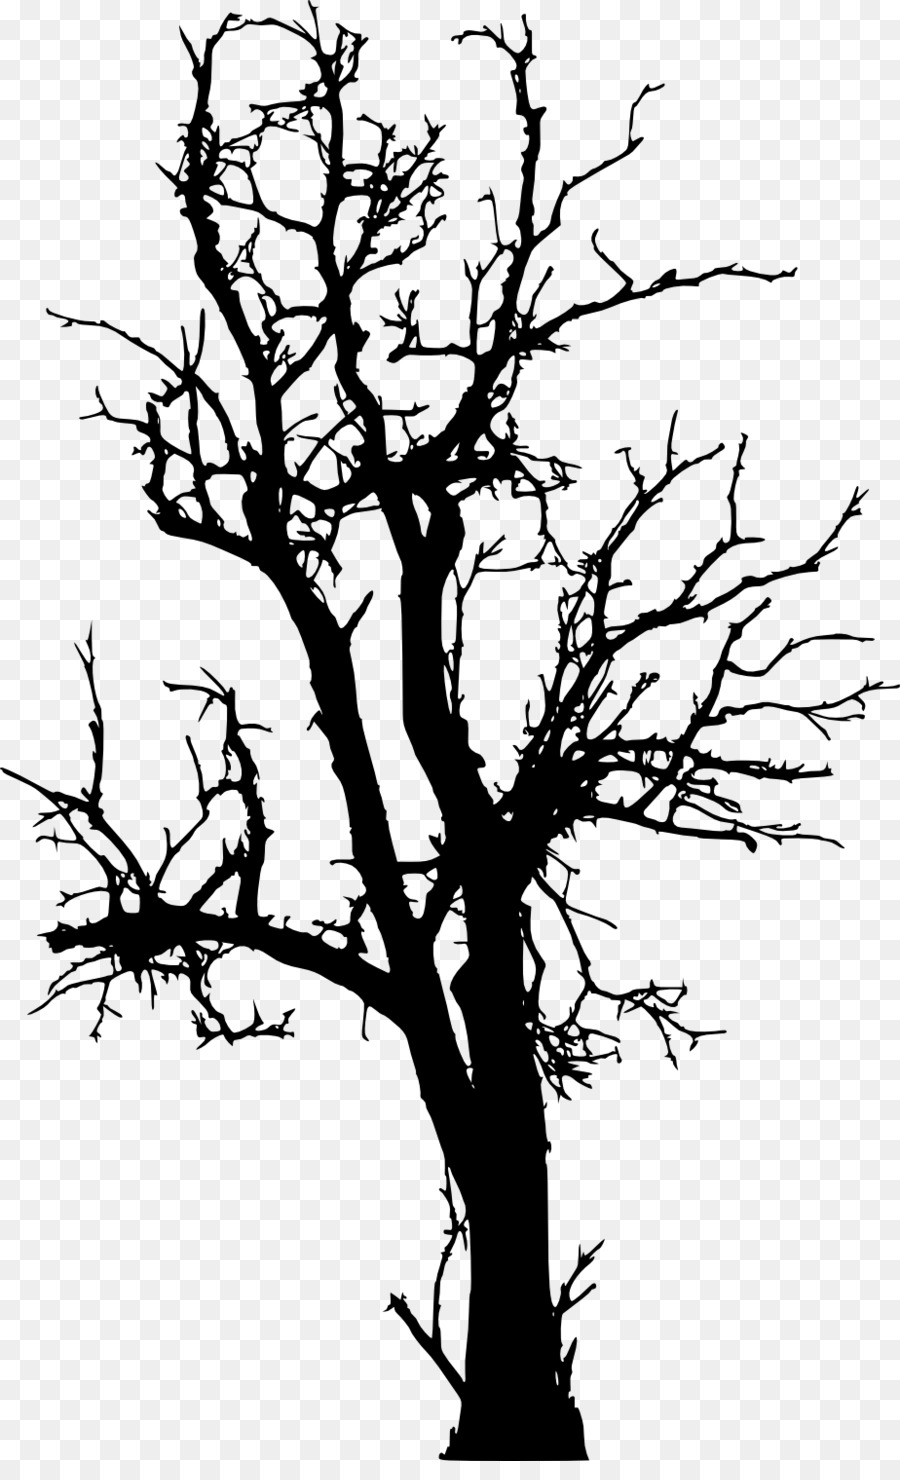 Tree Branch Woody plant Twig - dead tree png download - 924*1500 - Free Transparent Tree png Download.